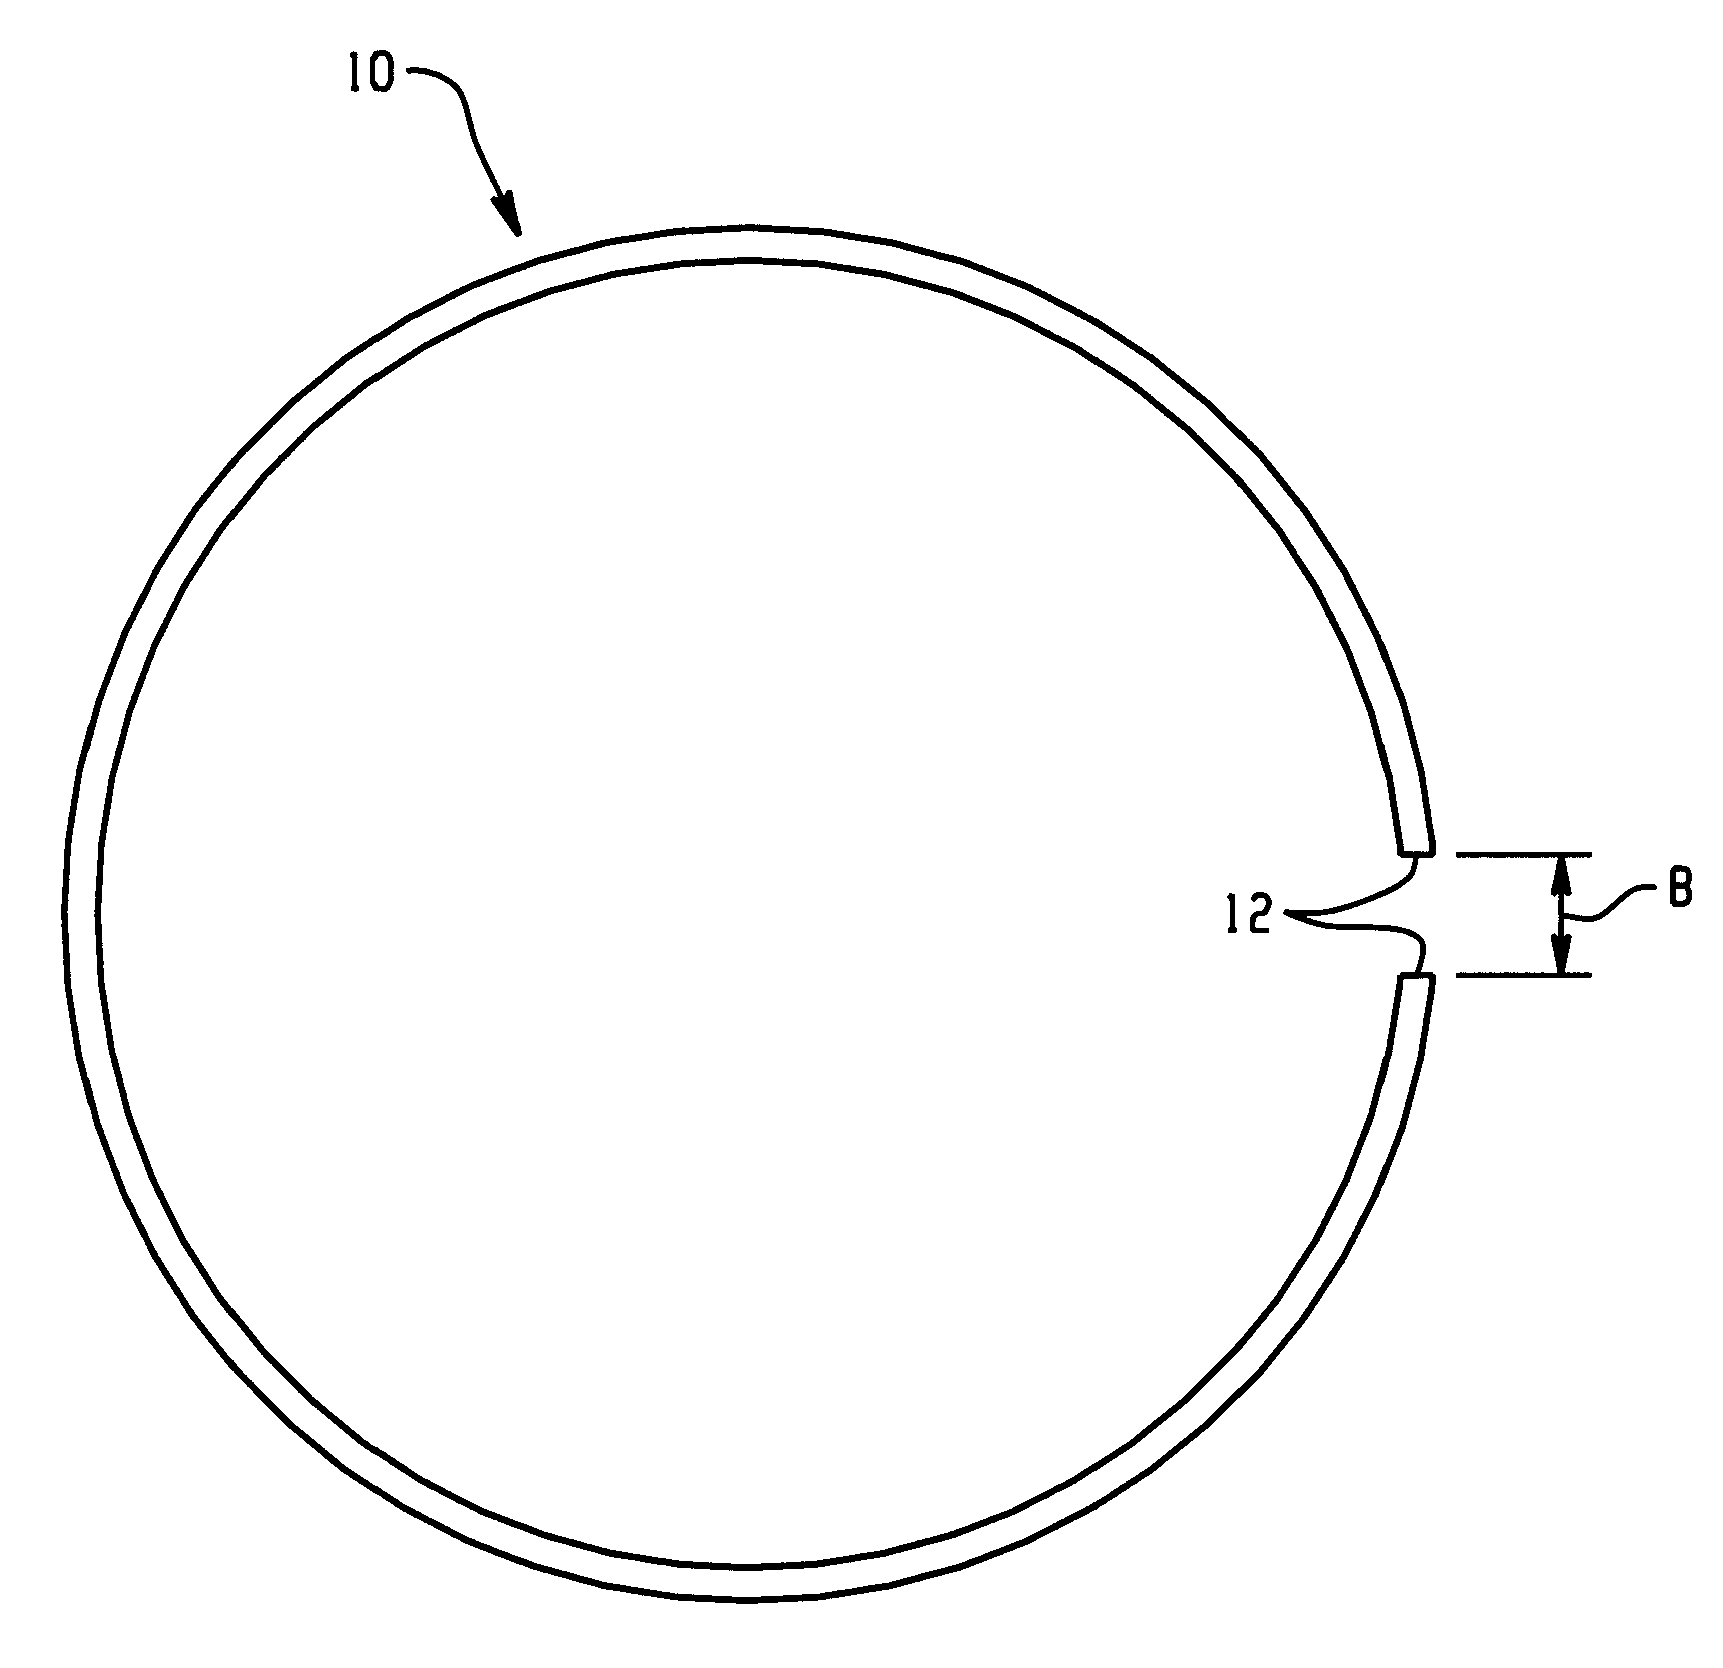 Piston ring assembly including a self accommodating smart piston ring